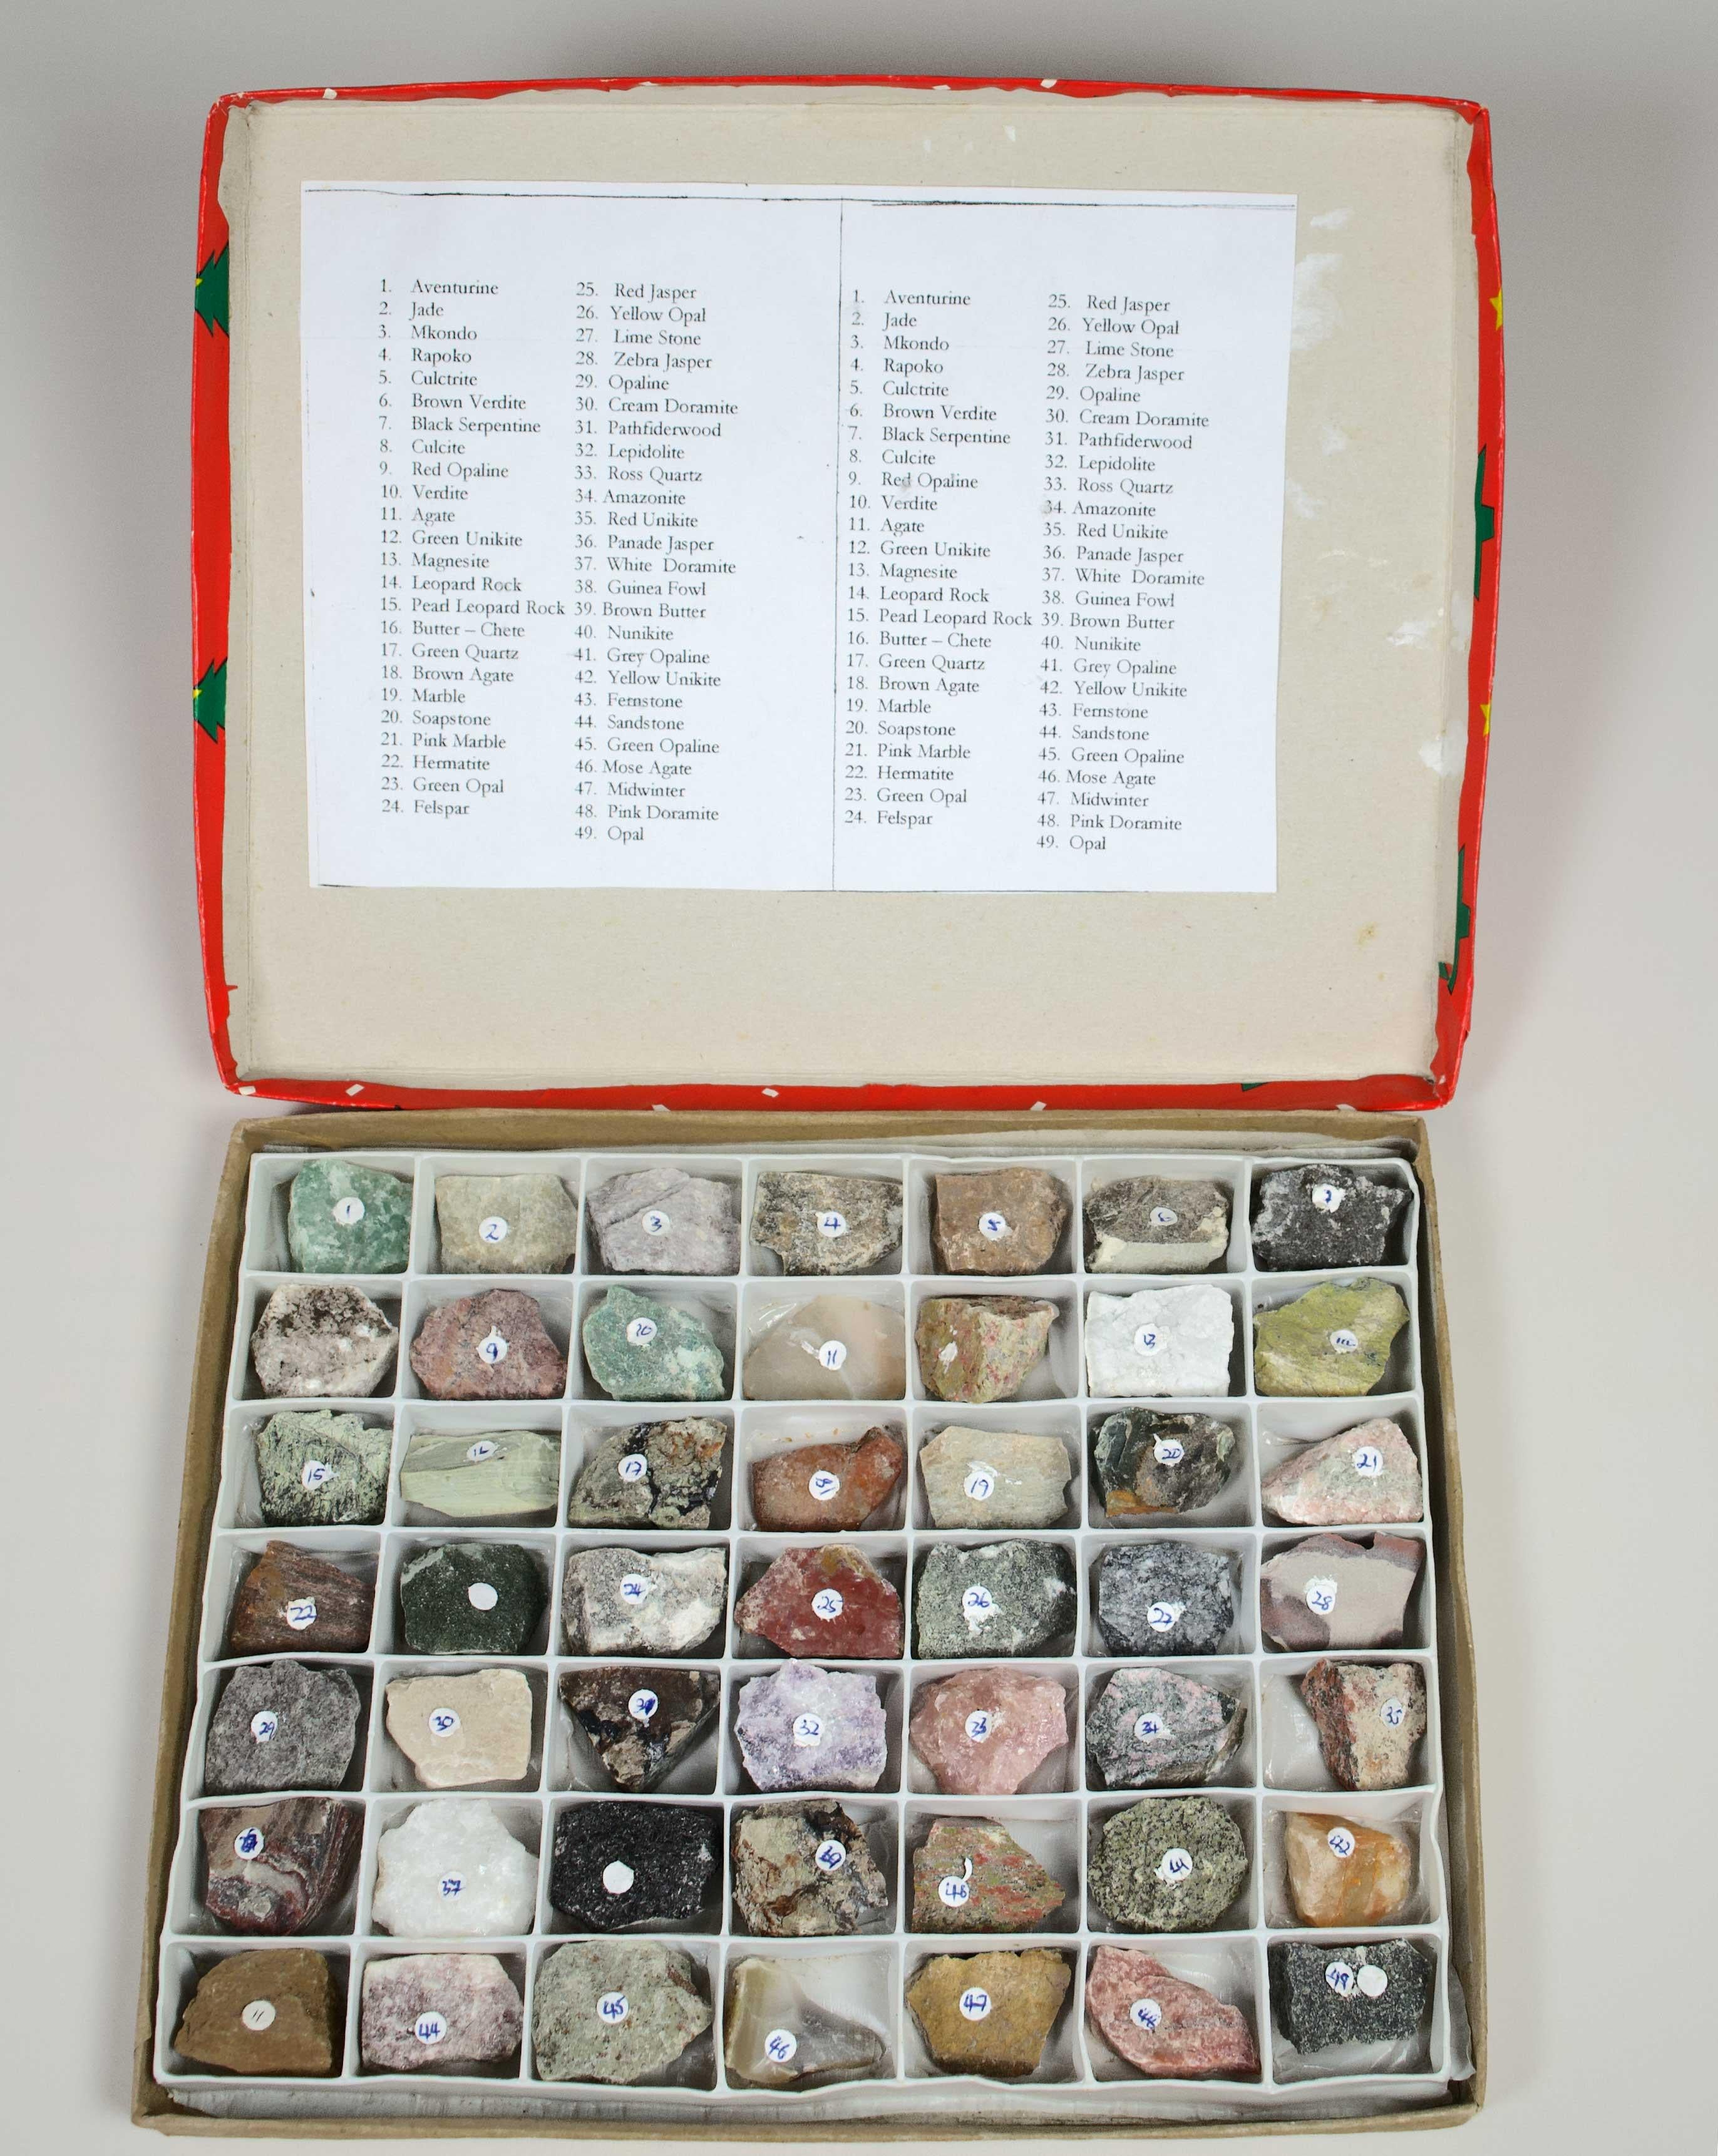 49 Shona Stone Samples with Specimen Box - Art by Unknown